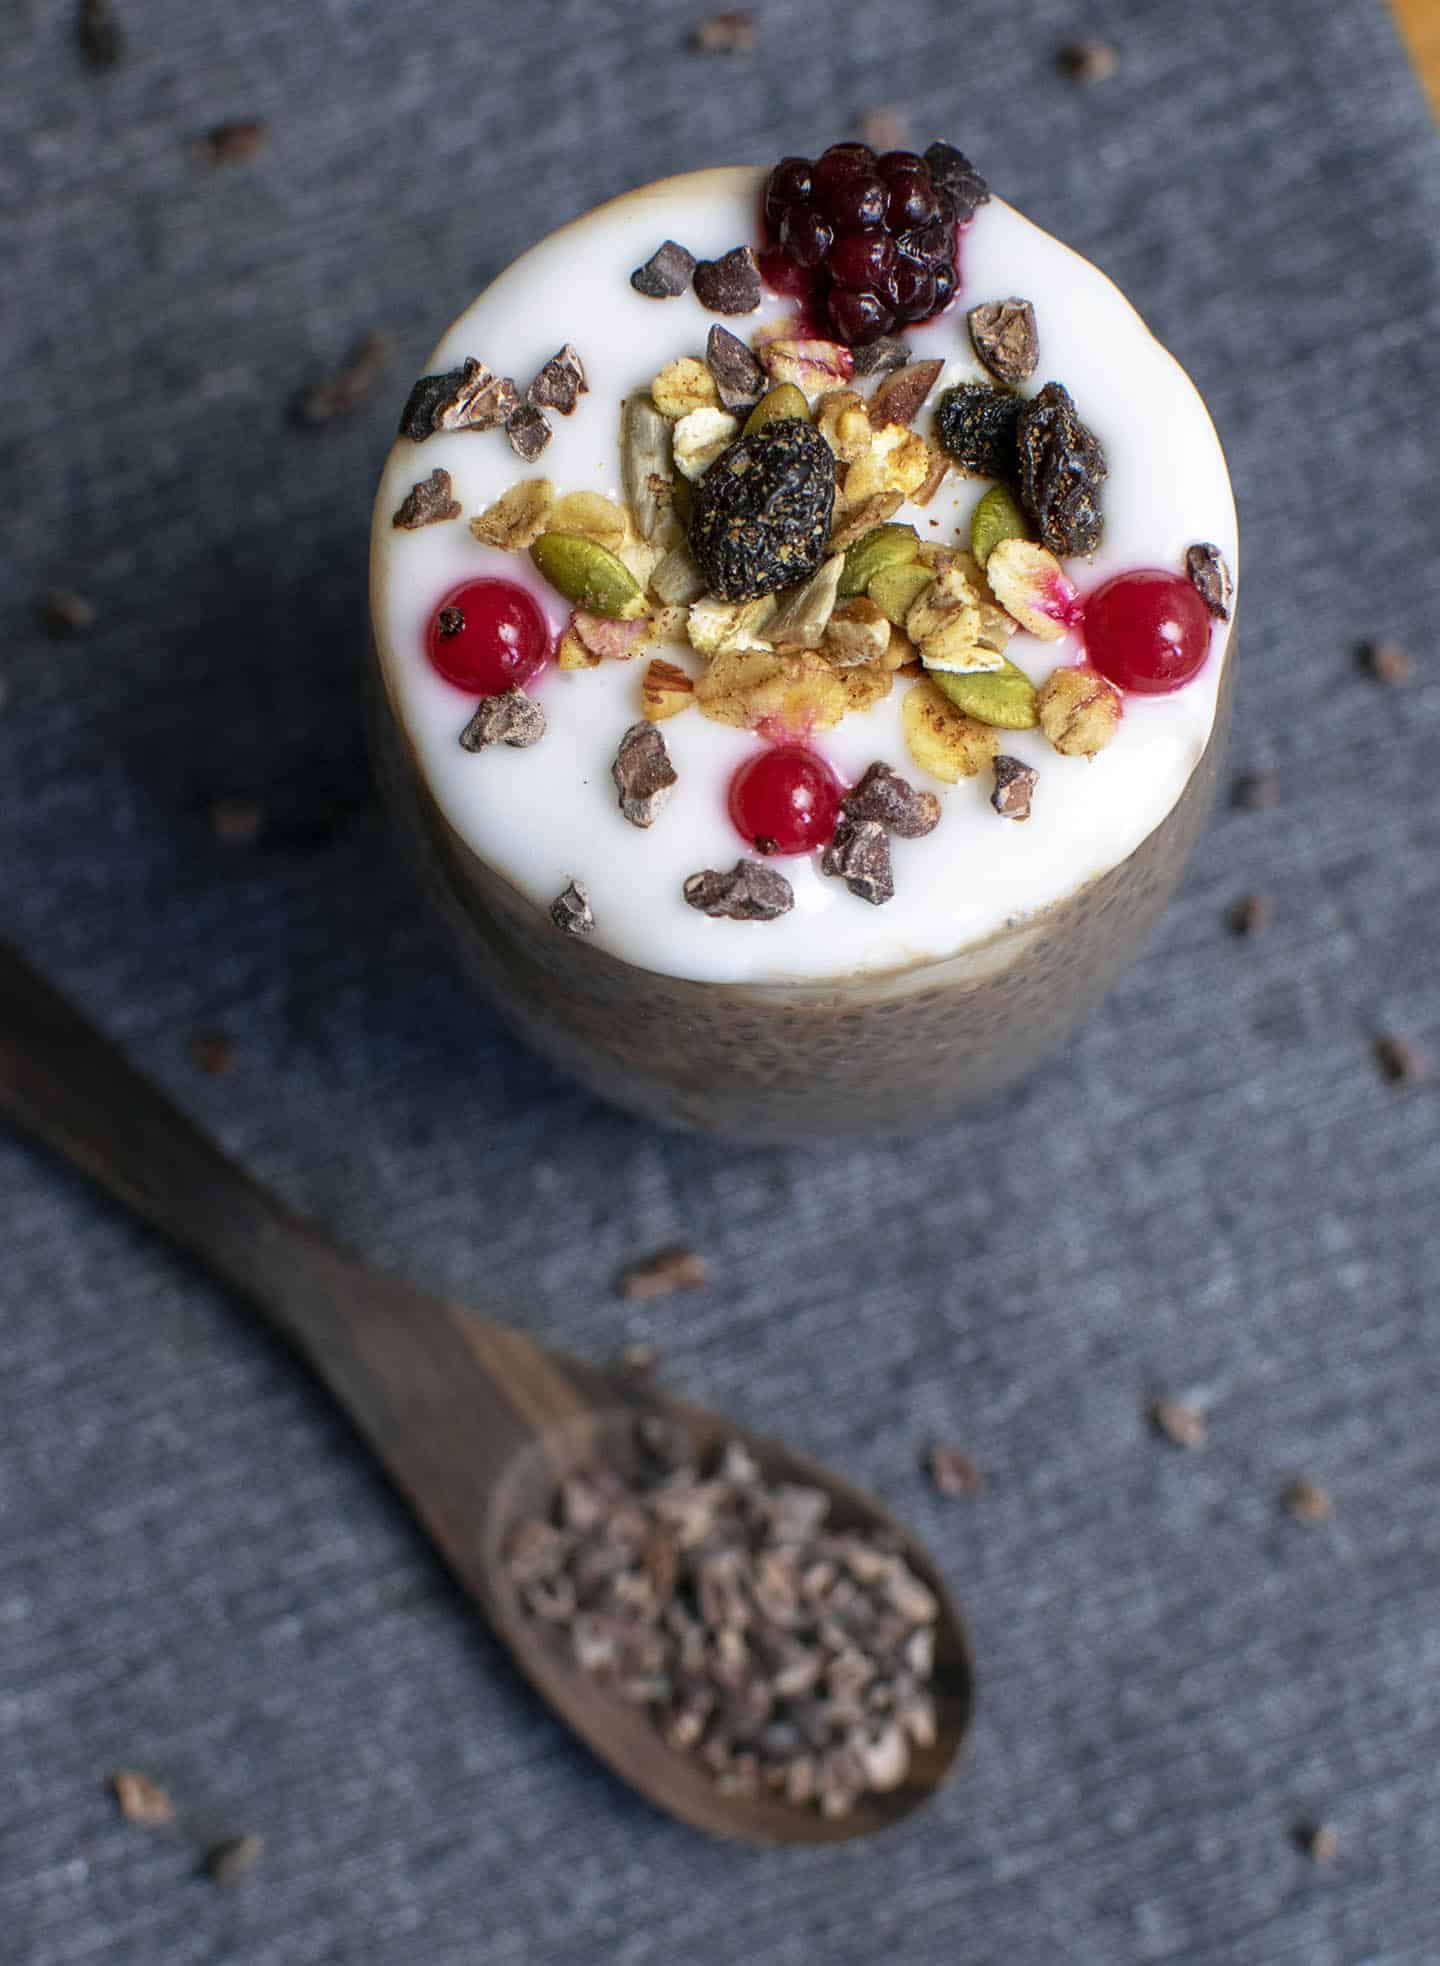 A scattering of vegan granola on top of a glass jar with red berries and blackcurrant. Set on a blue background with cacao nibs scattered on the background and a wooden spoon has cacao nibs placed on it.